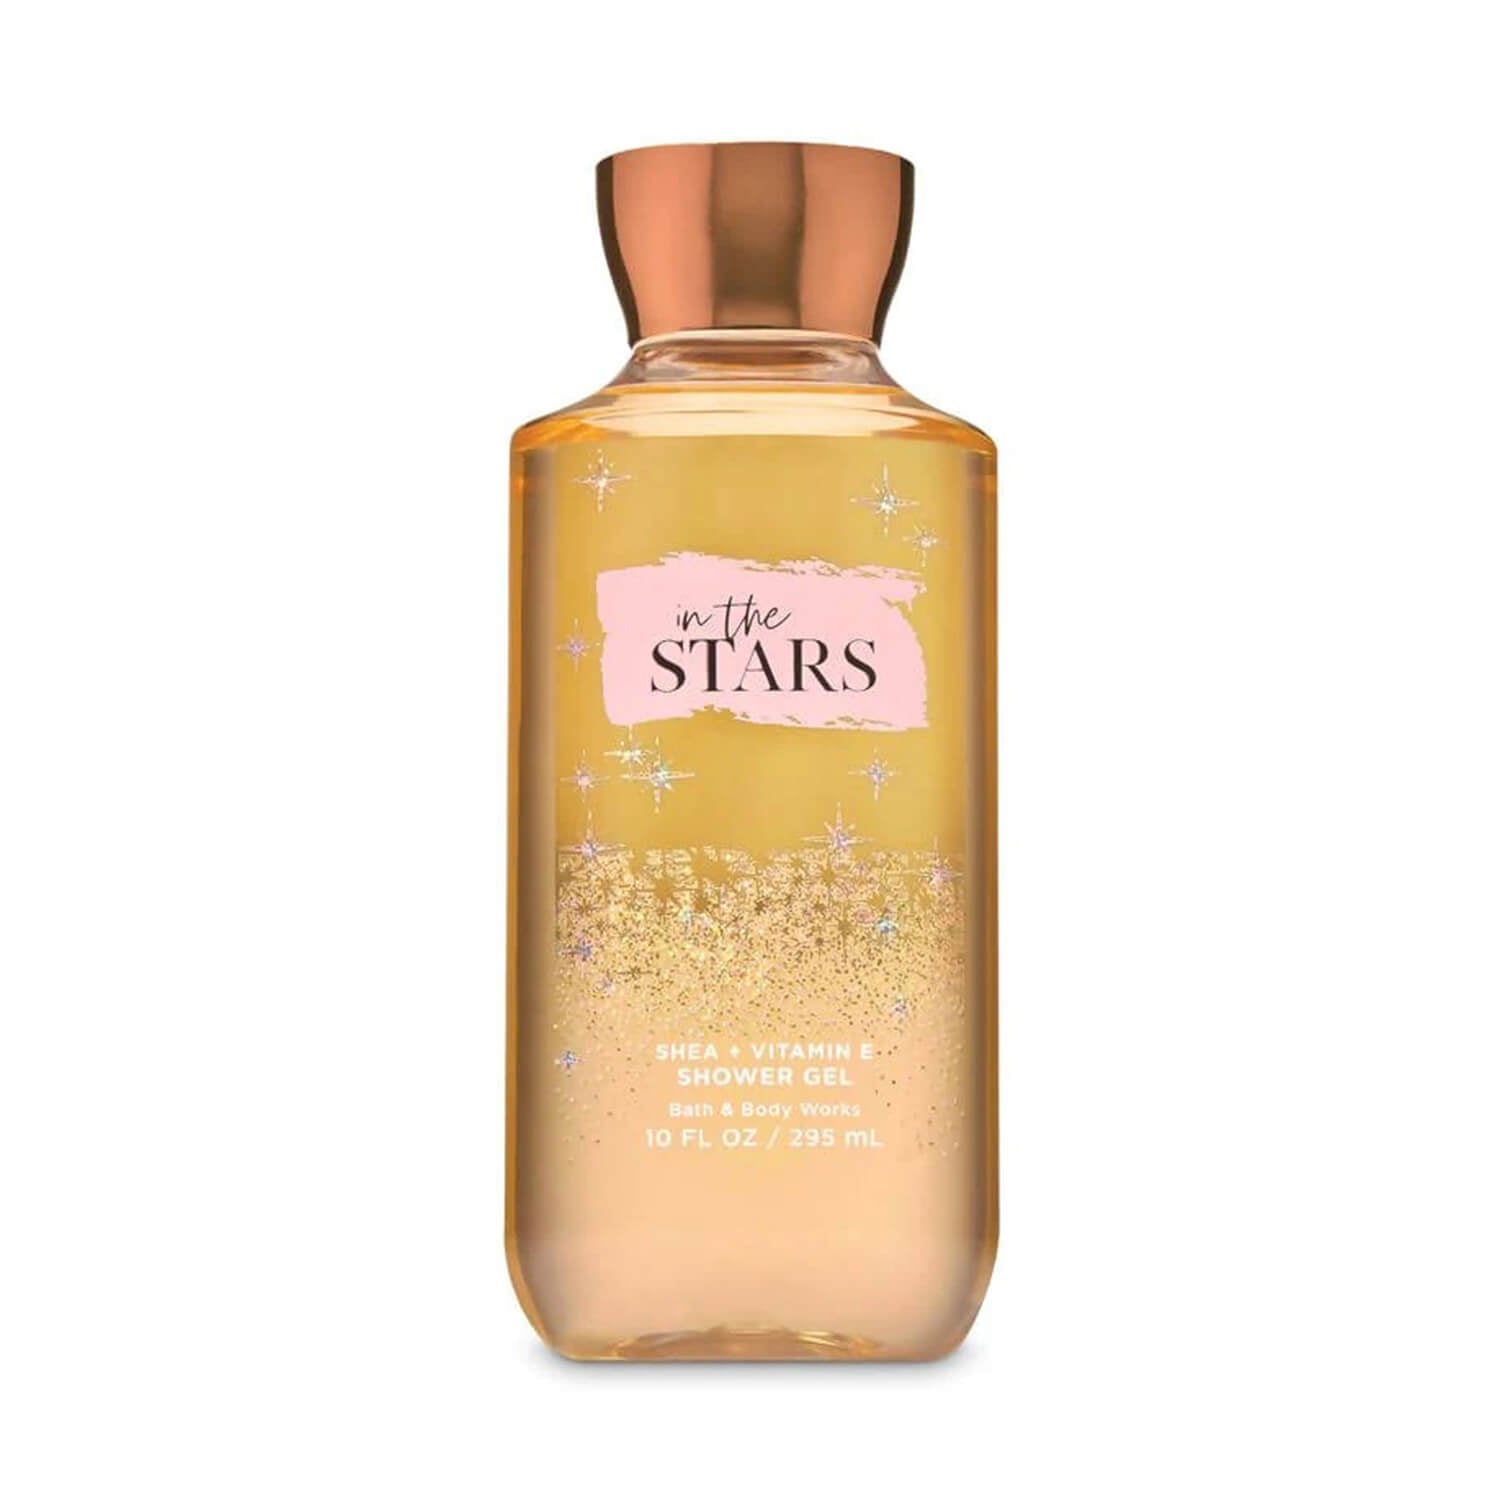 Shop Bath and Body Works shower gel In the Stars fragrance available at Heygirl.pk for delivery in Pakistan.